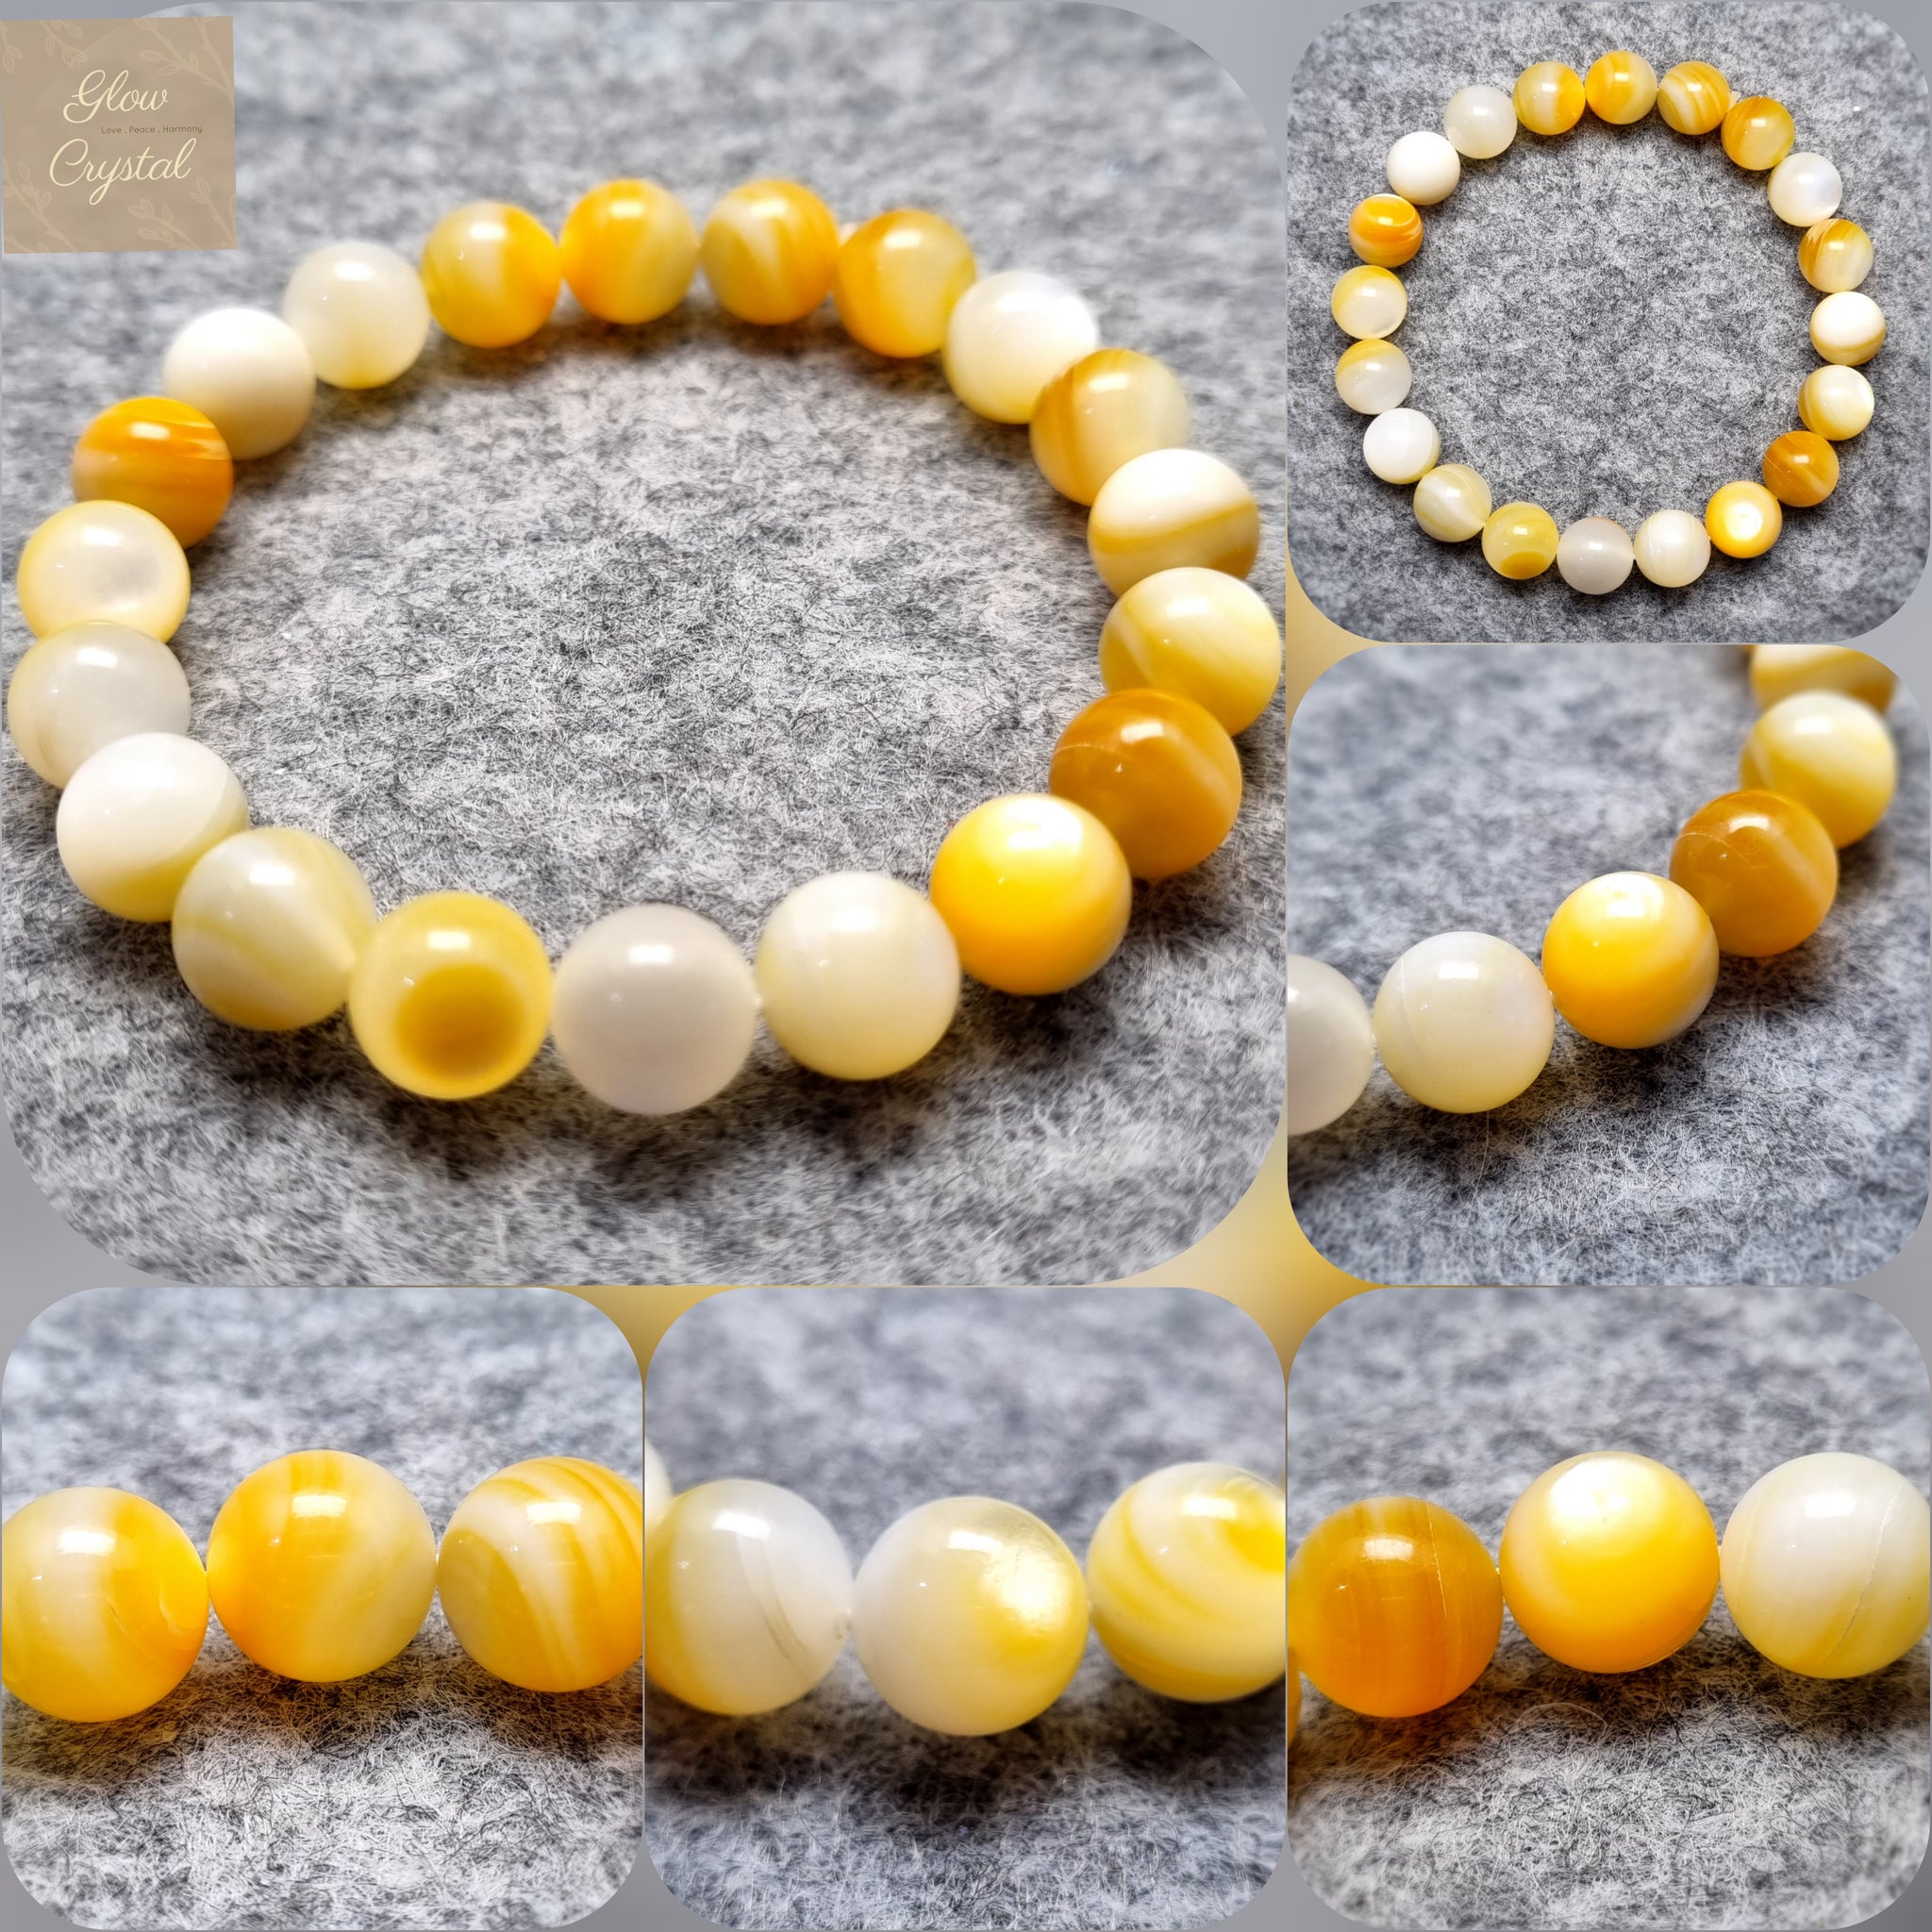 B0624 - Yellow Shell Beads with White Sheen Bracelet - 10mm